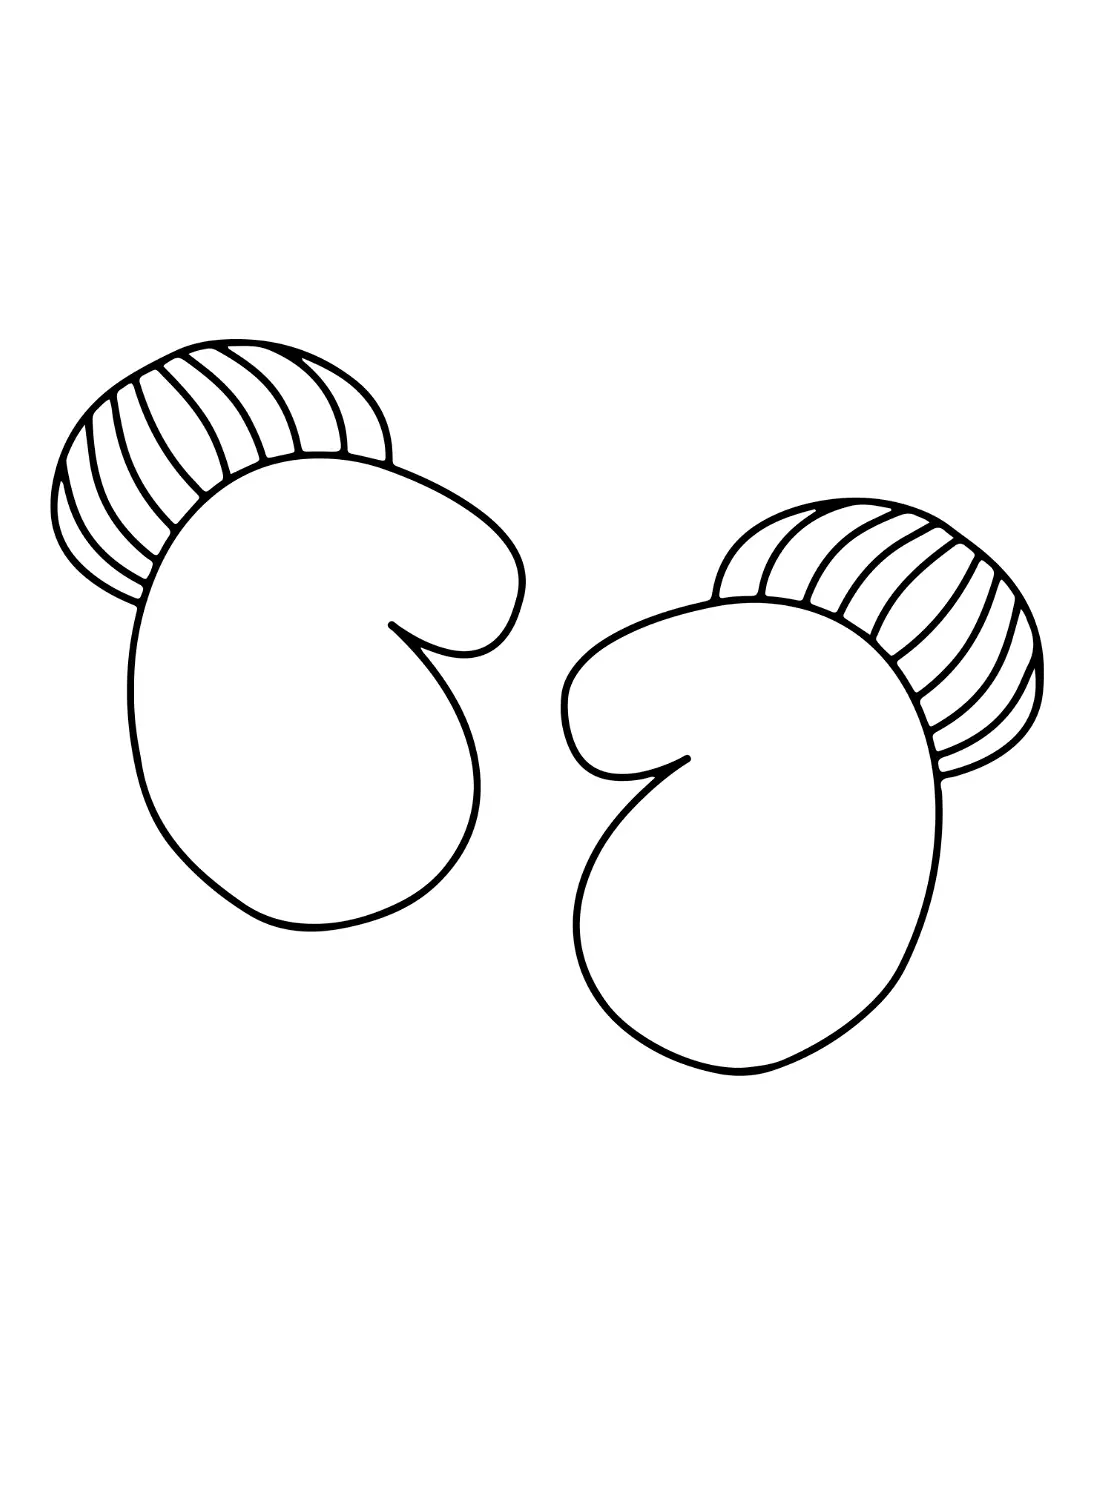 Mittens Coloring Pages